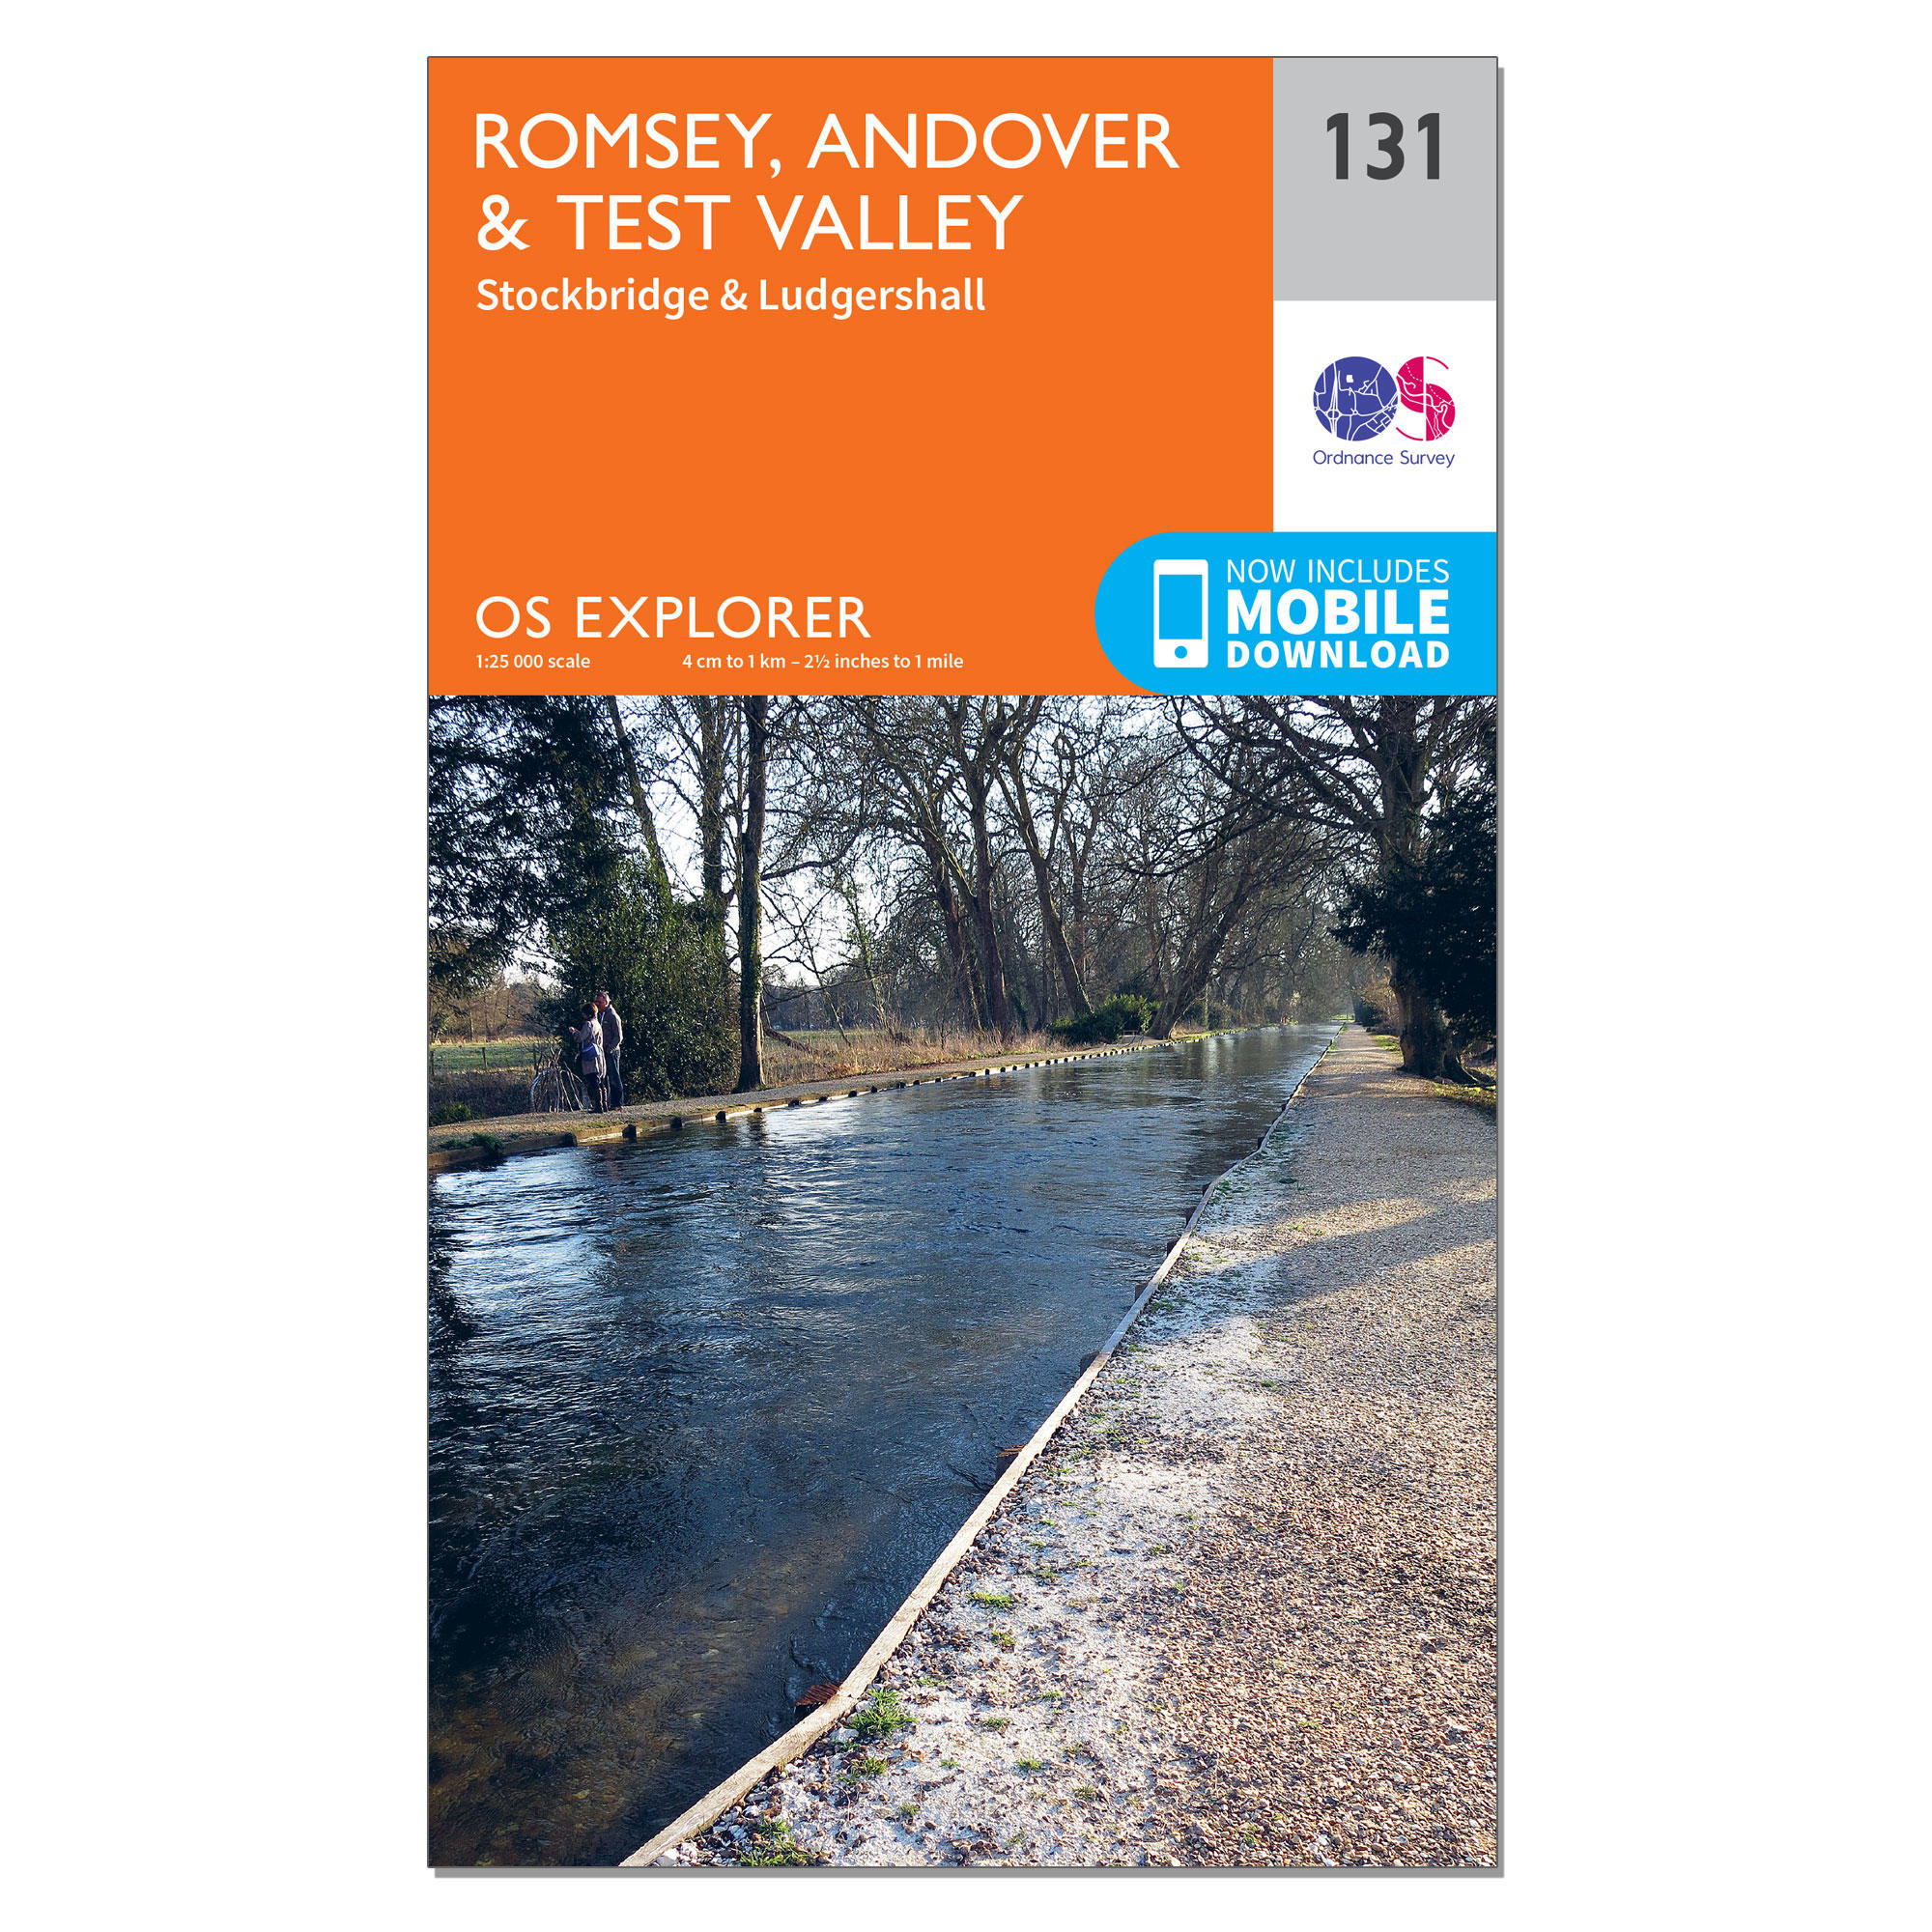 OS Explorer Map - Romsey, Andover & Test Valley 1/2